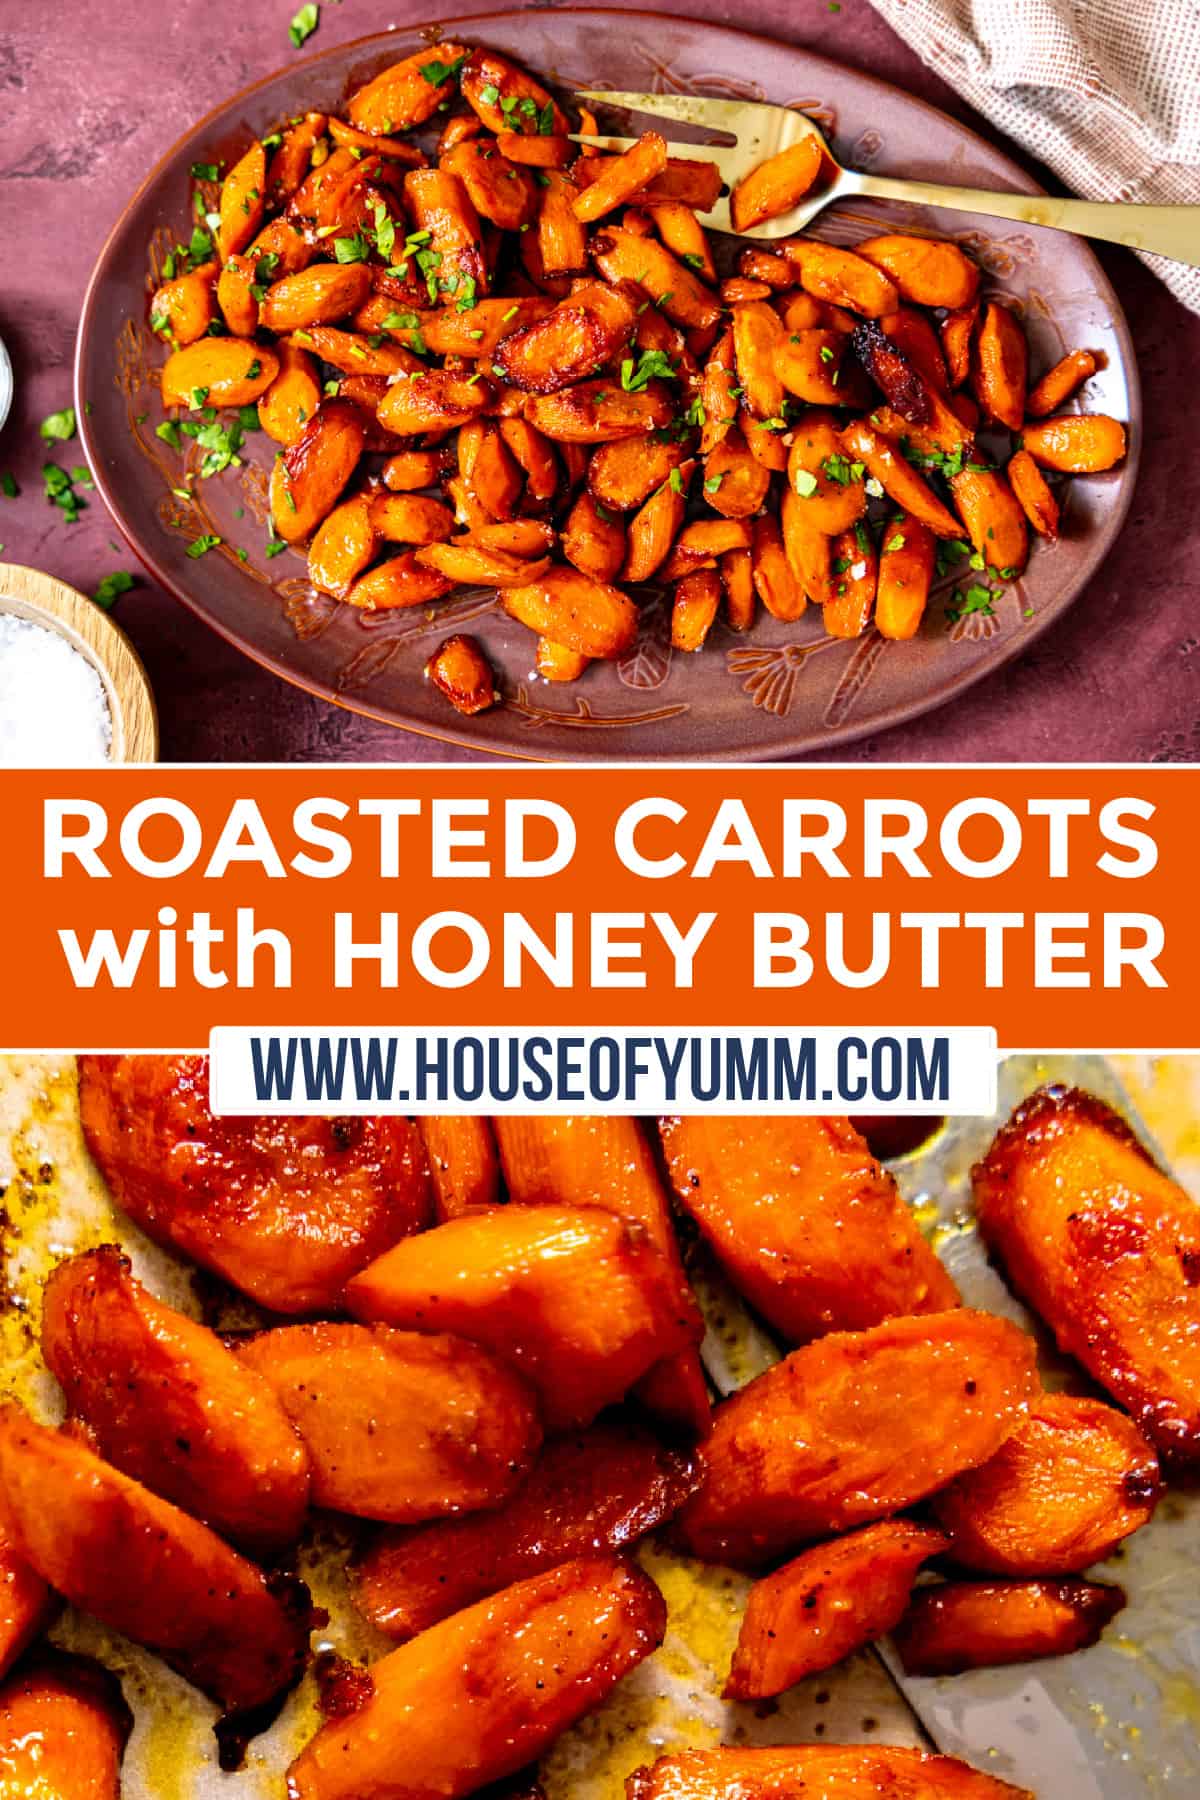 Roasted carrots with honey butter Pinterest collage.